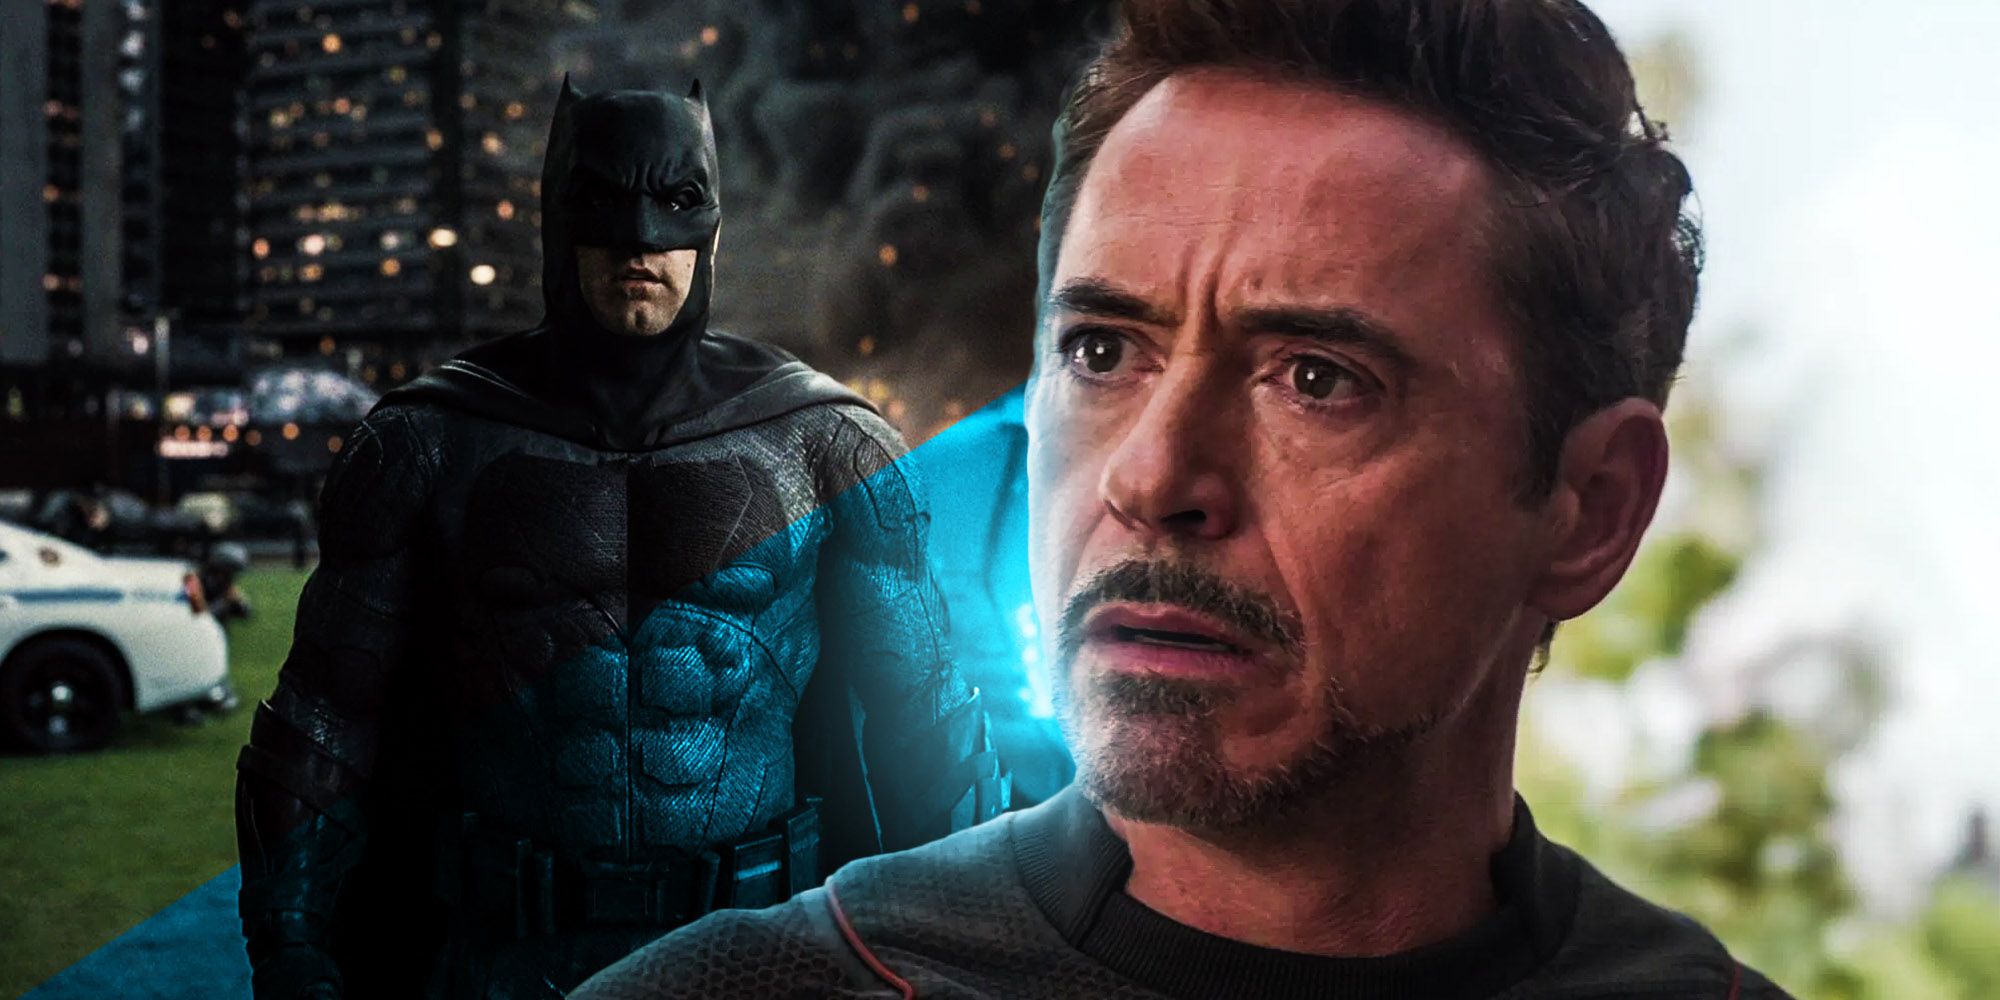 Batman Succeeded In Justice League Where Iron Man Failed In Infinity War